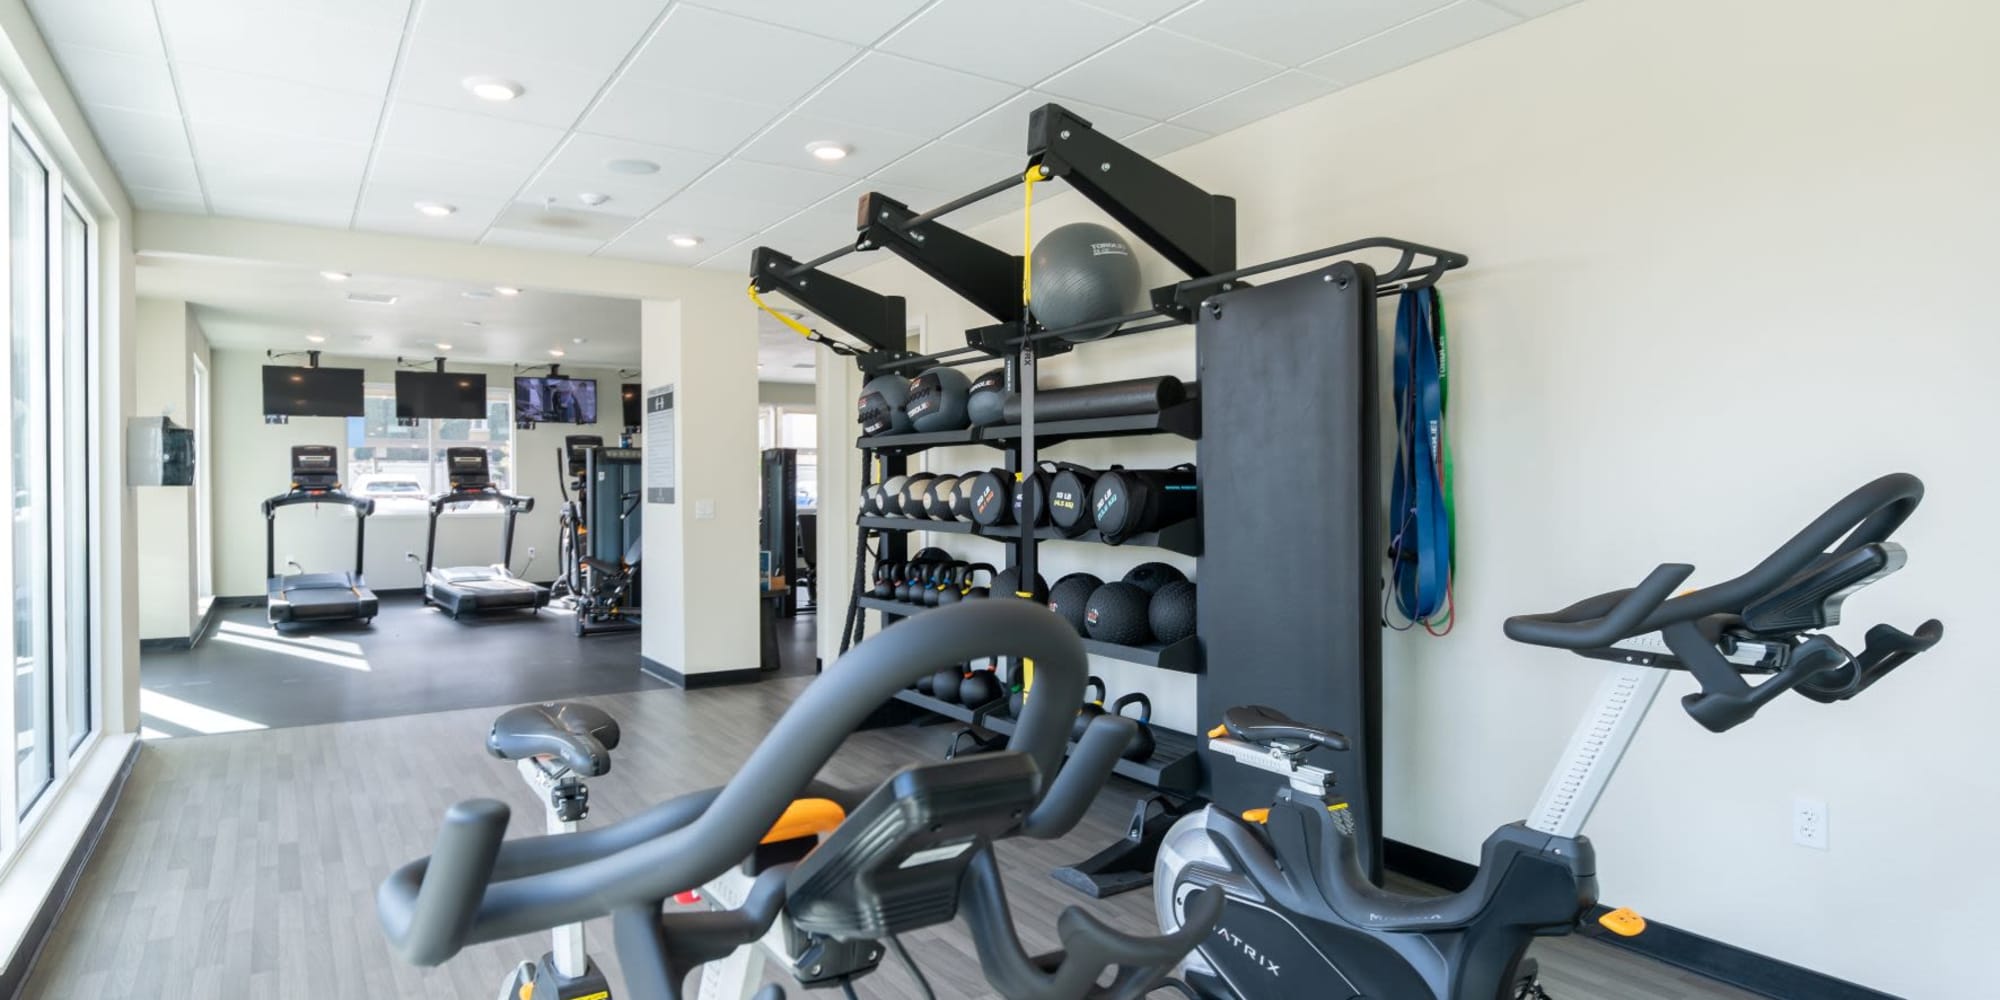 Fitness center at Towne Centre Apartments in Lathrop, California